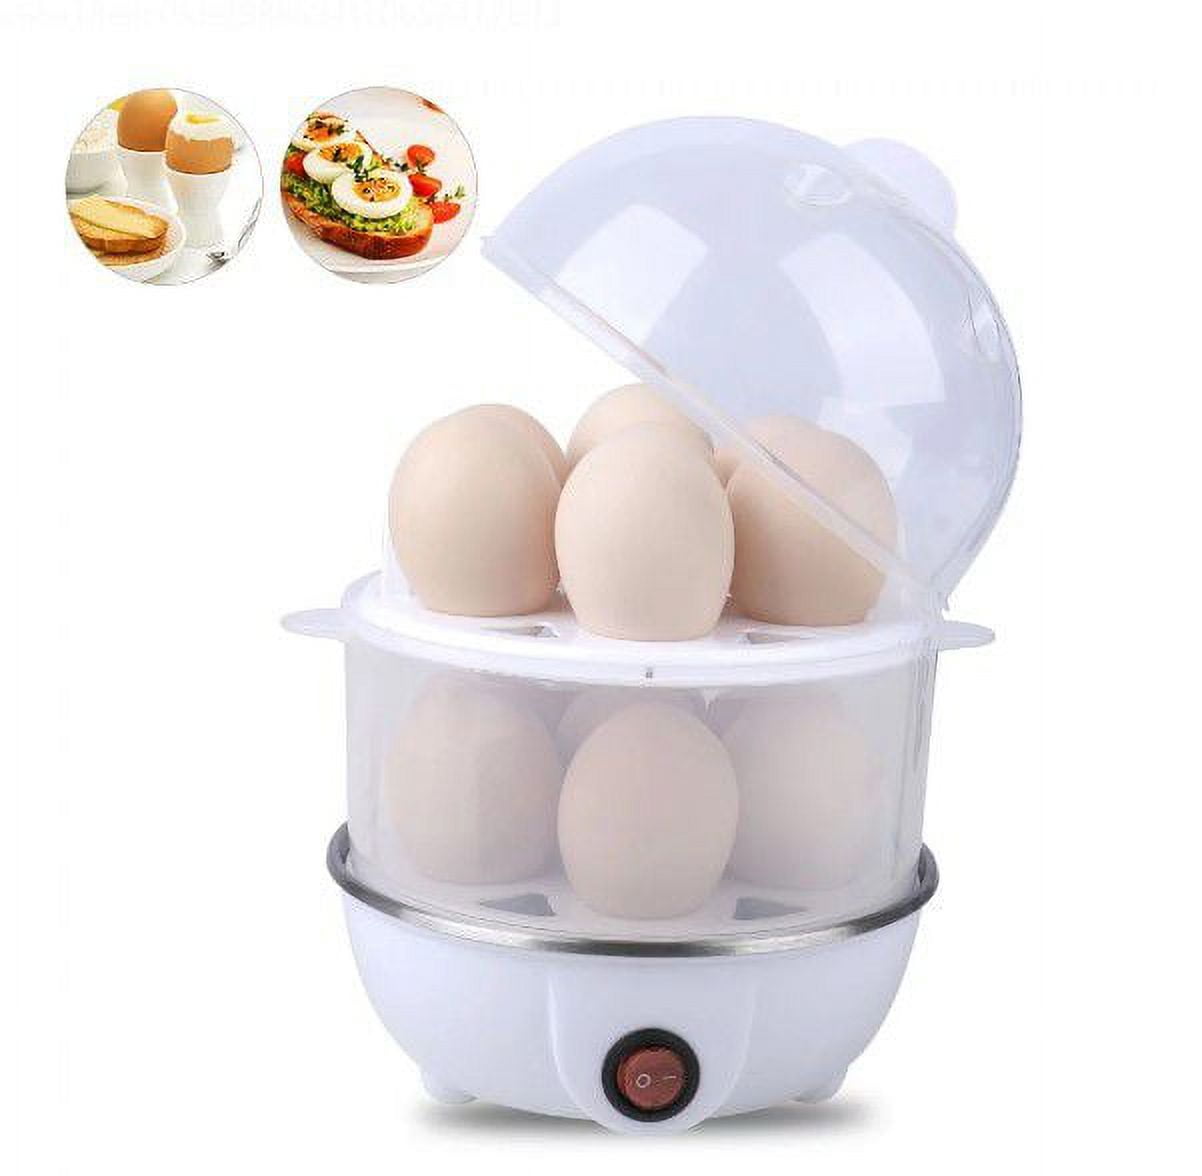 KRUPS Simply Electric Egg Cooker With Accessories Black - Office Depot